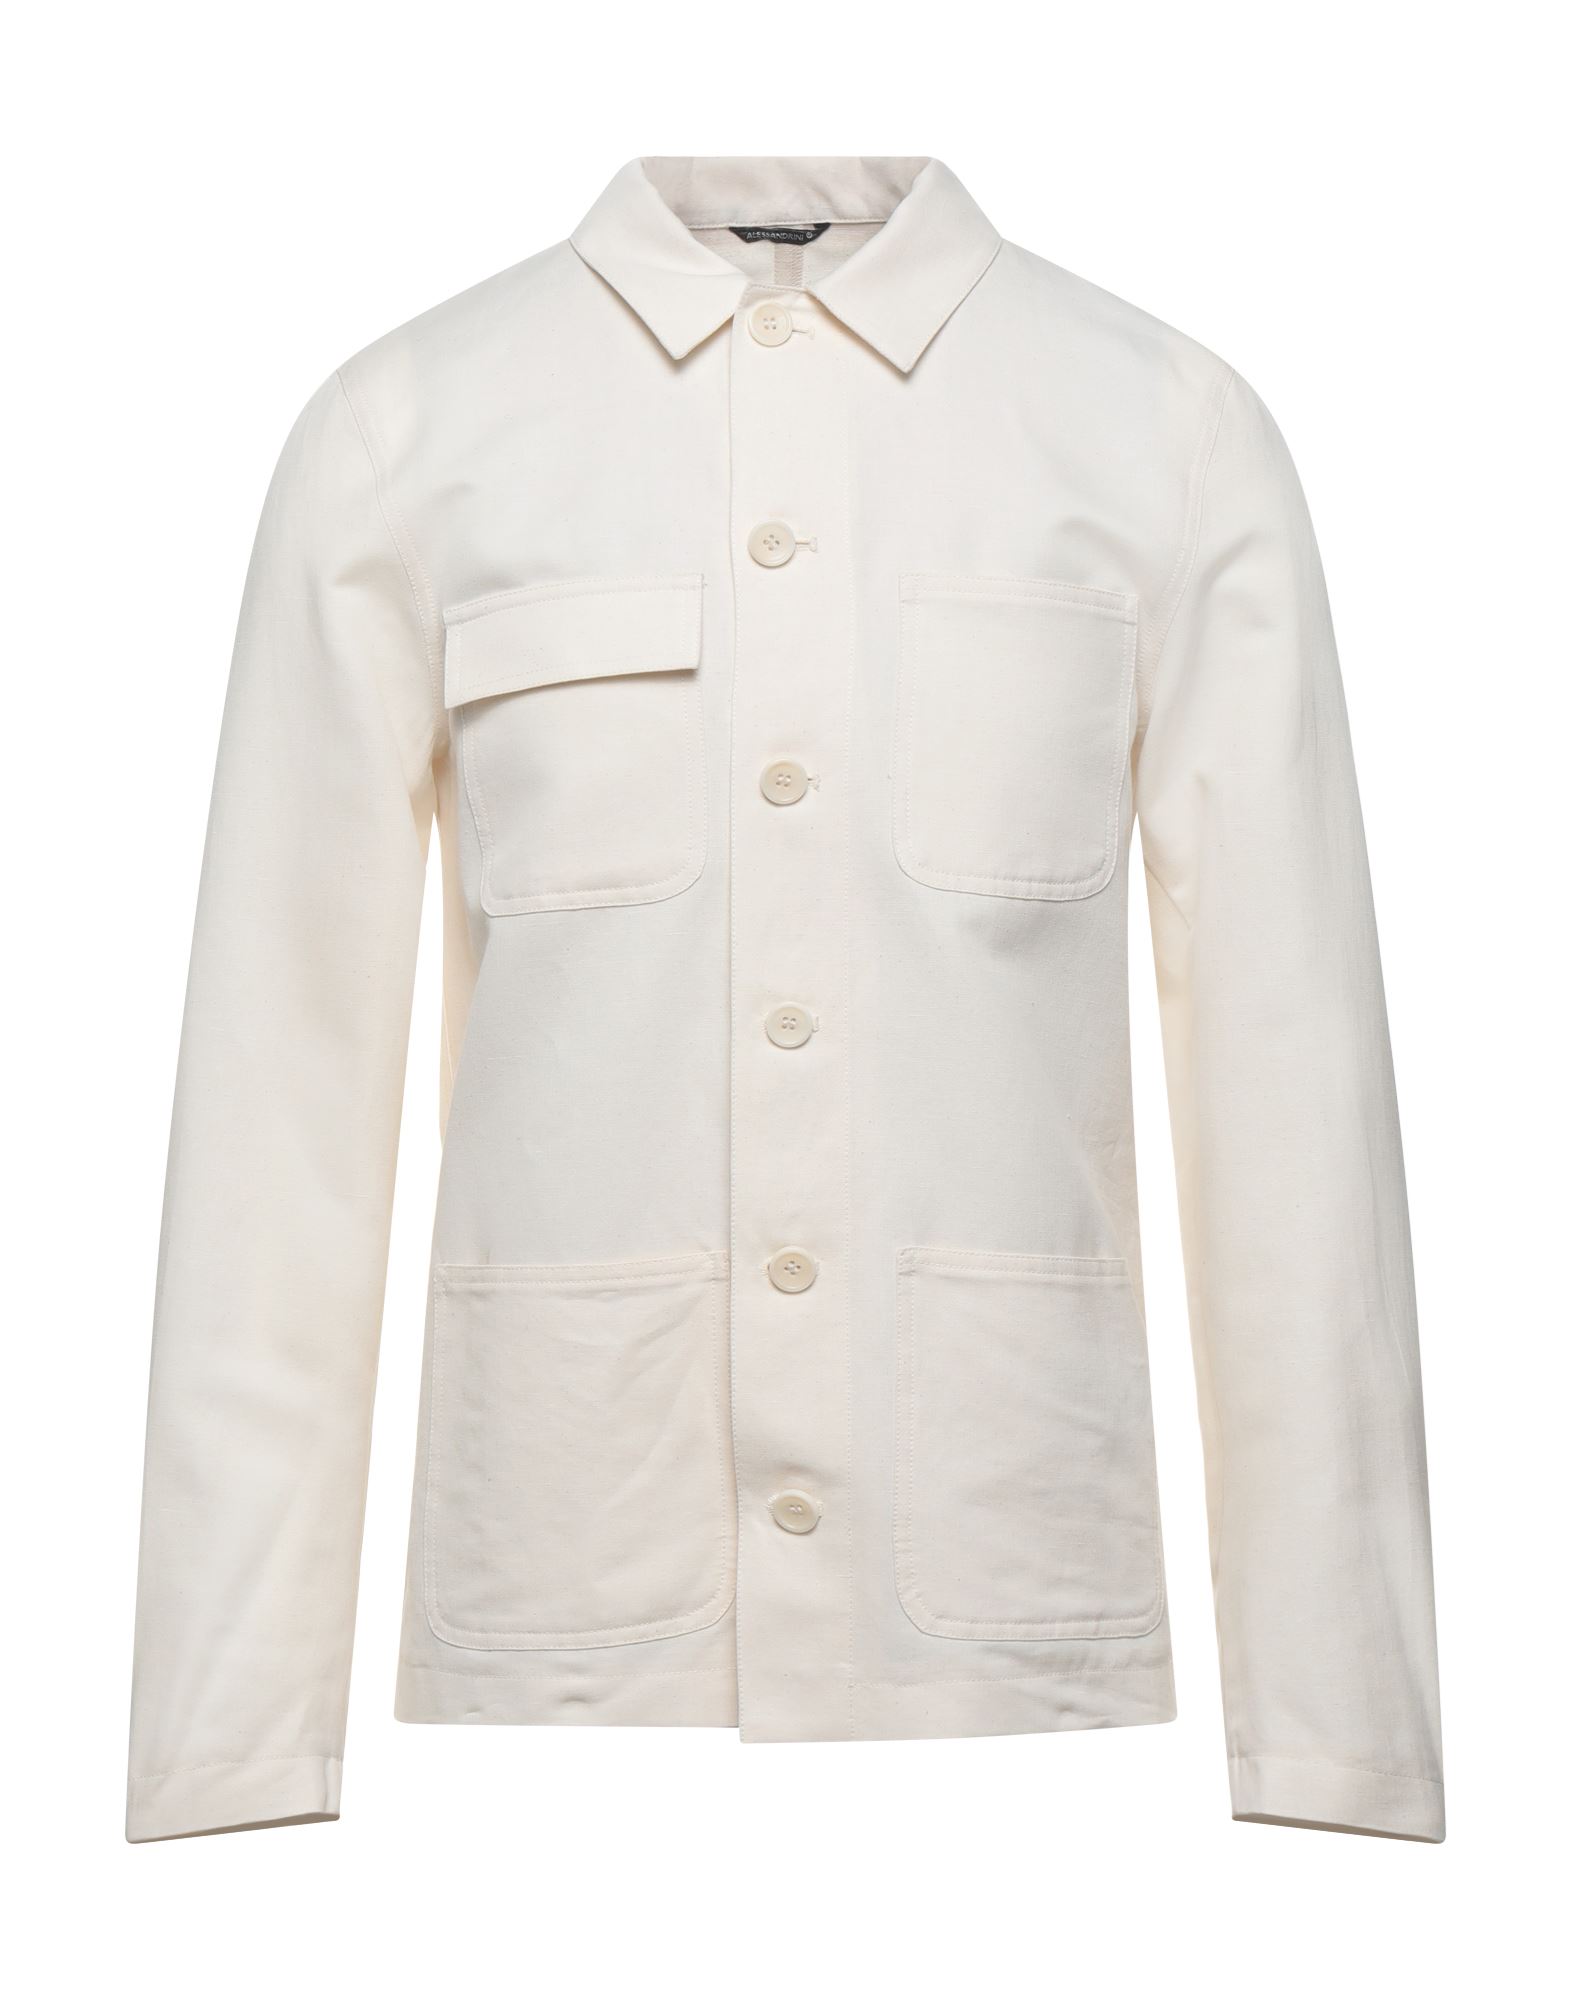 Daniele Alessandrini Homme Suit Jackets In White